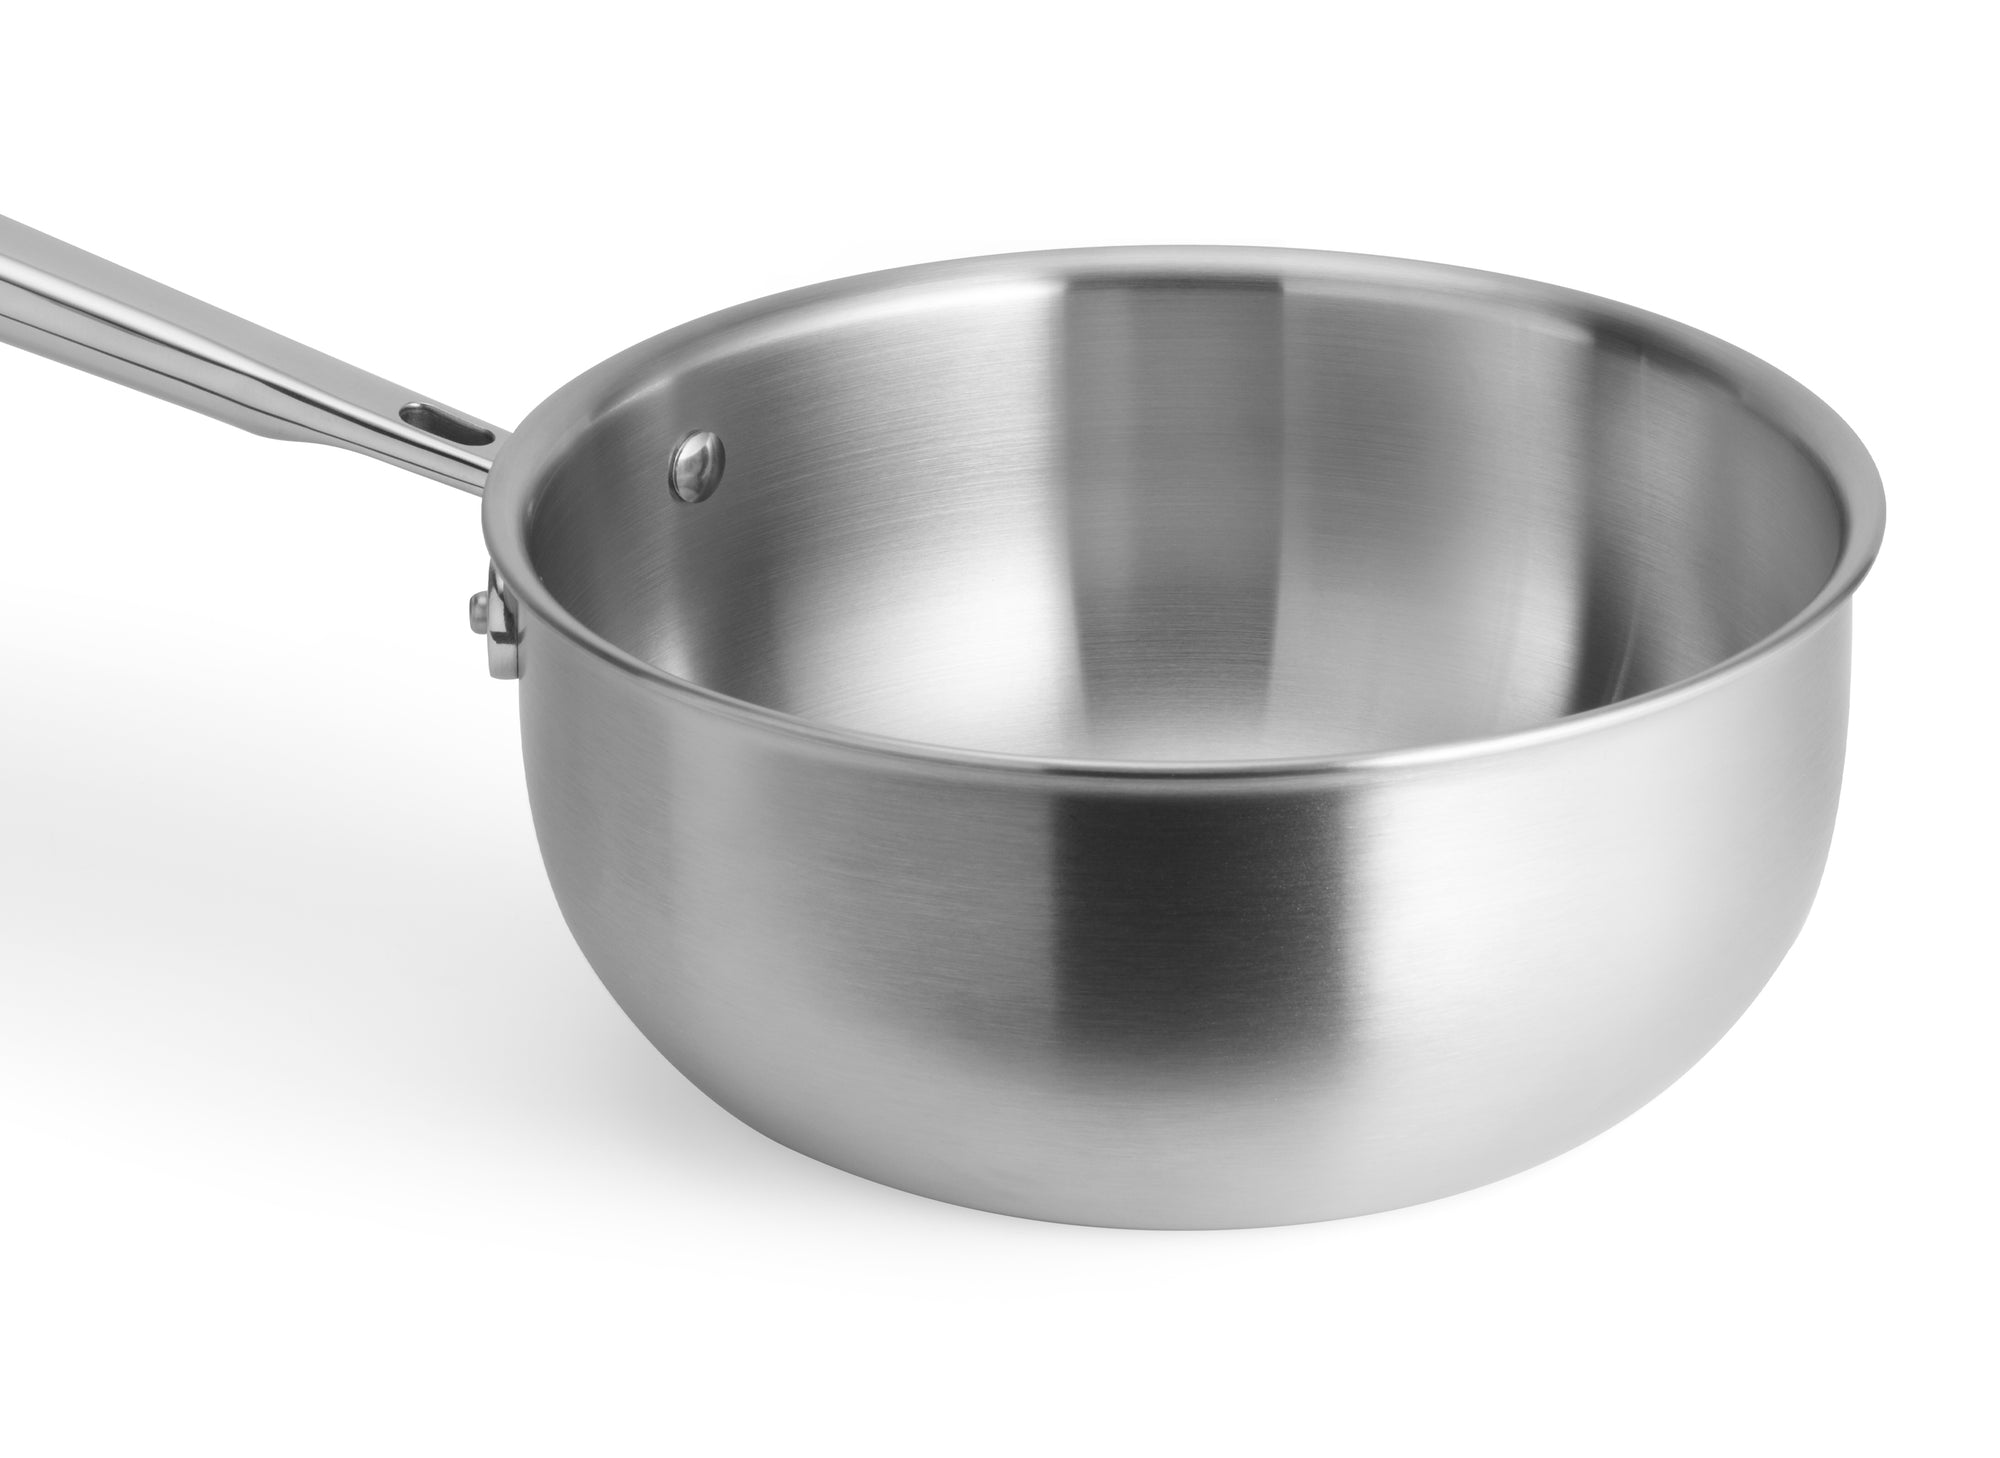 The 2 quart Misen Saucier features unique, curved and sloped walls, which prevent bits of food from getting stuck or burnt.